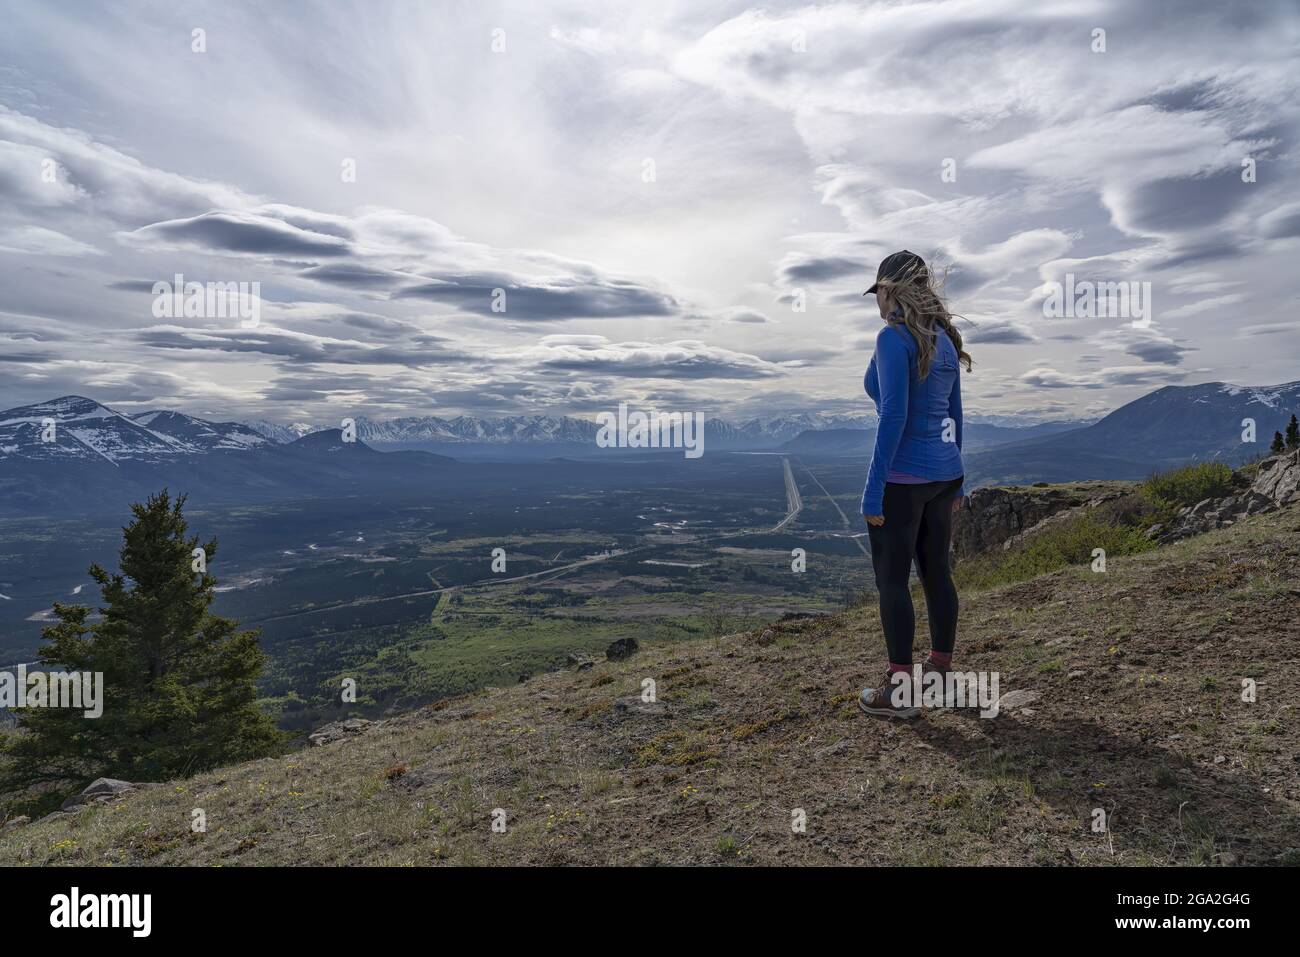 View from behind of a woman standing on a mountaintop looking out at the vista of the majestic mountain ranges and valley below with a dramatic clo... Stock Photo